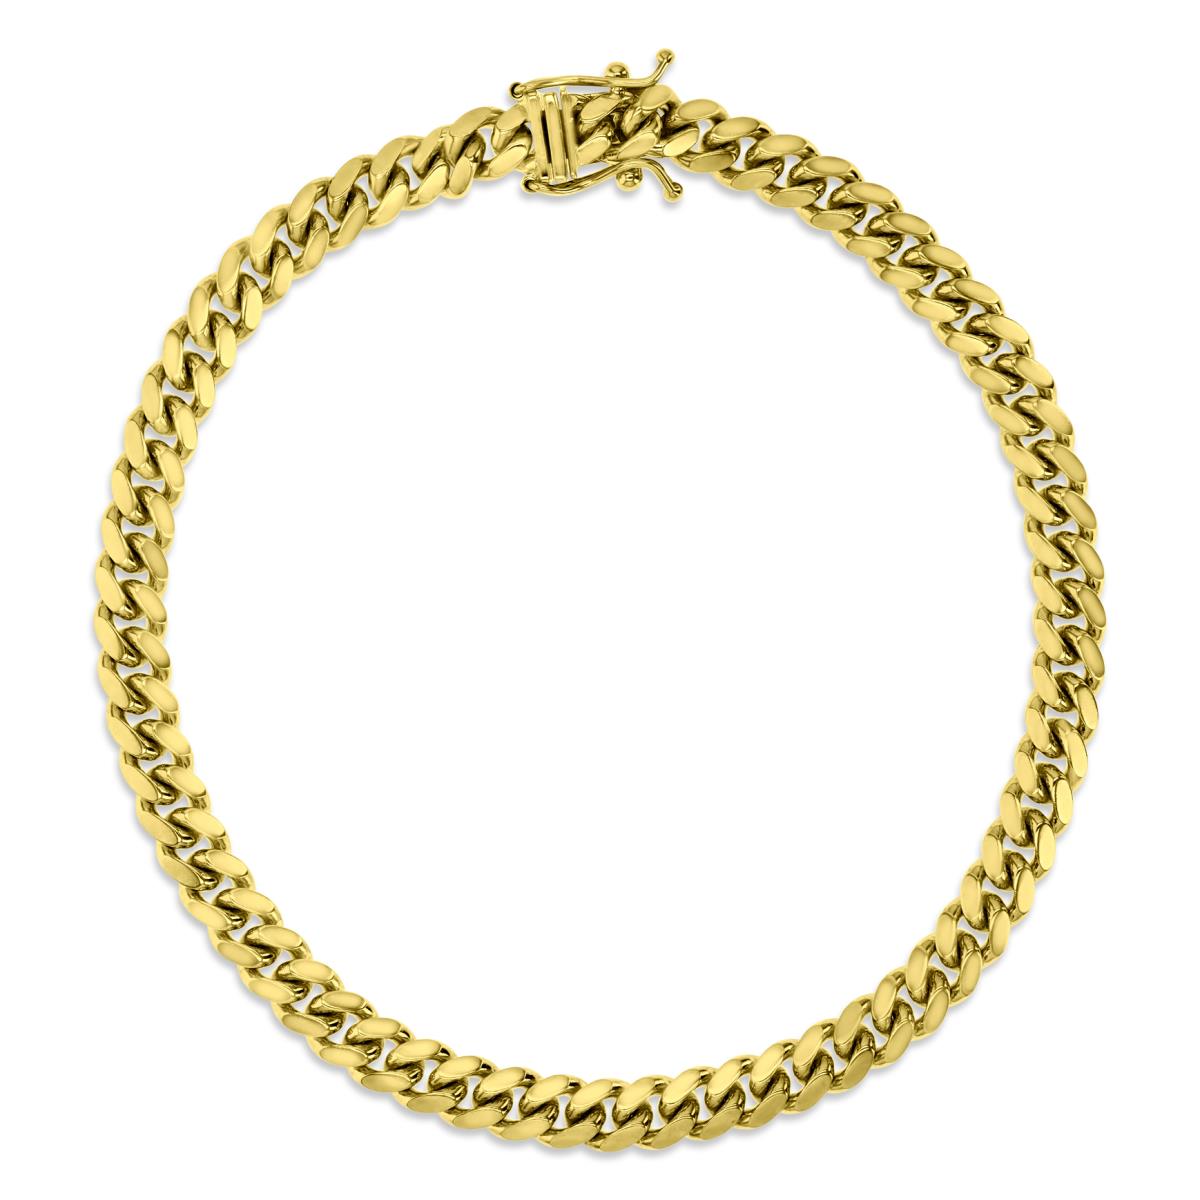 14K Yellow Gold 5mm Solid Miami Cuban 150 8.25" Chain Bracelet With Box Lock